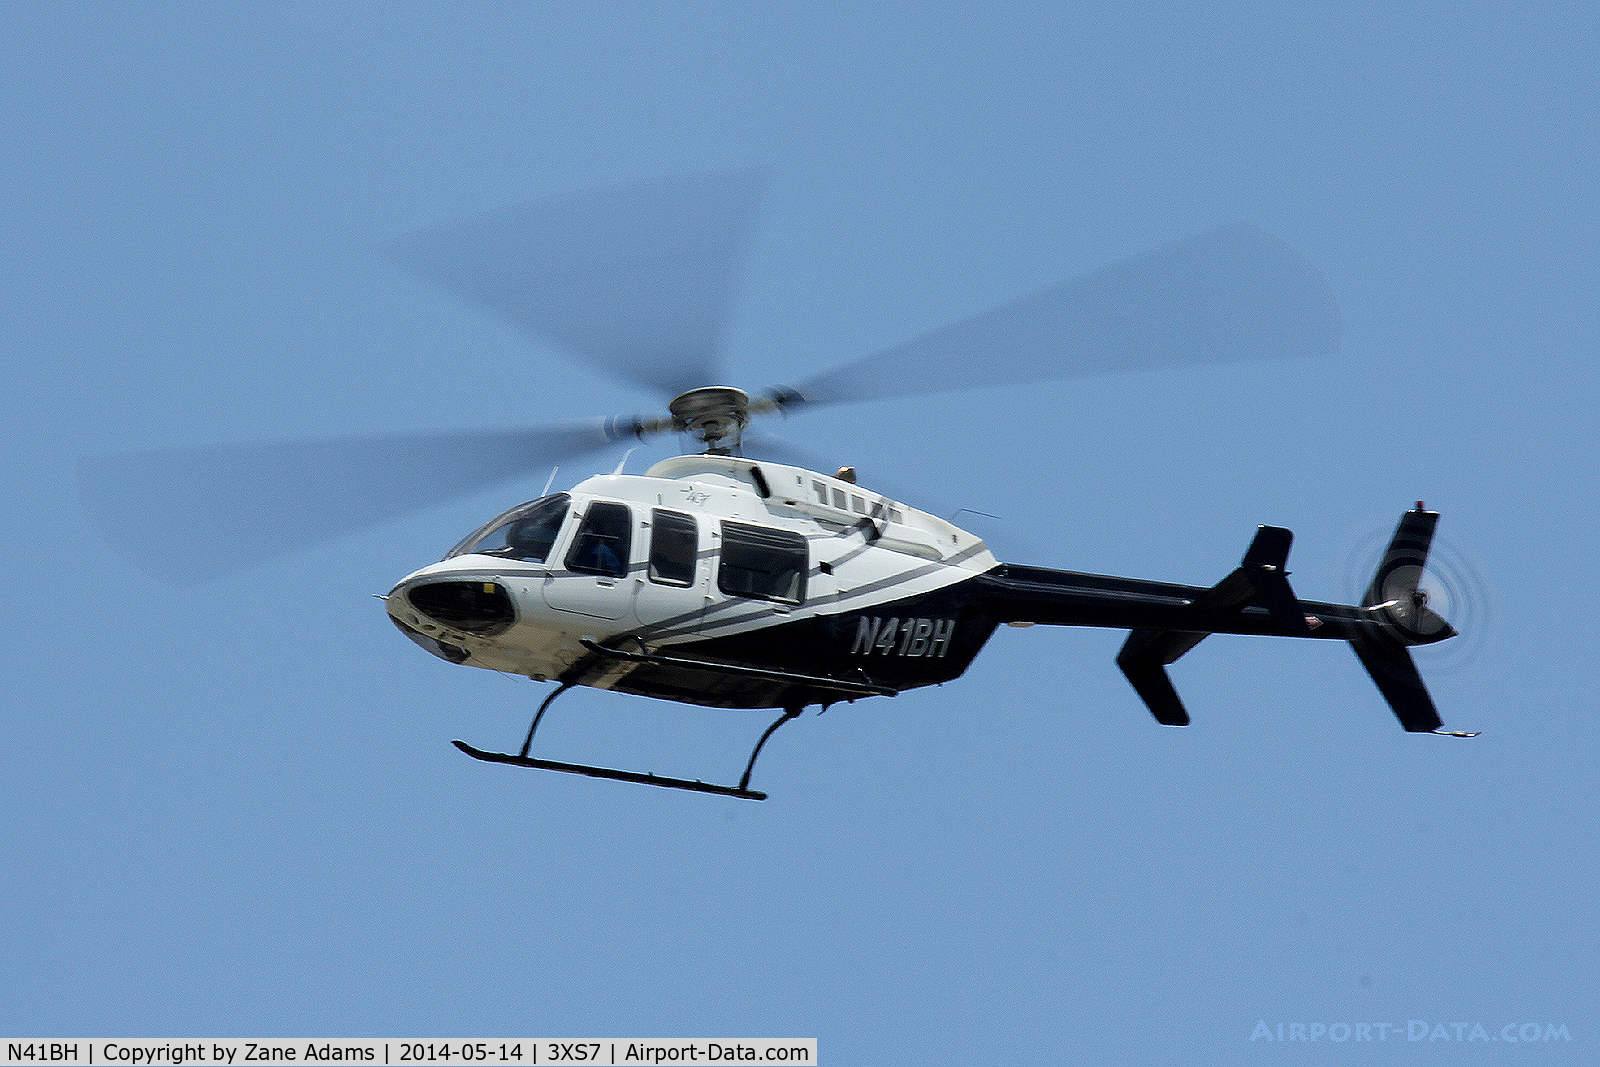 N41BH, 1997 Bell 407 C/N 53183, Flying at the Bell Helicopter Training Facility - Fort Worth, TX